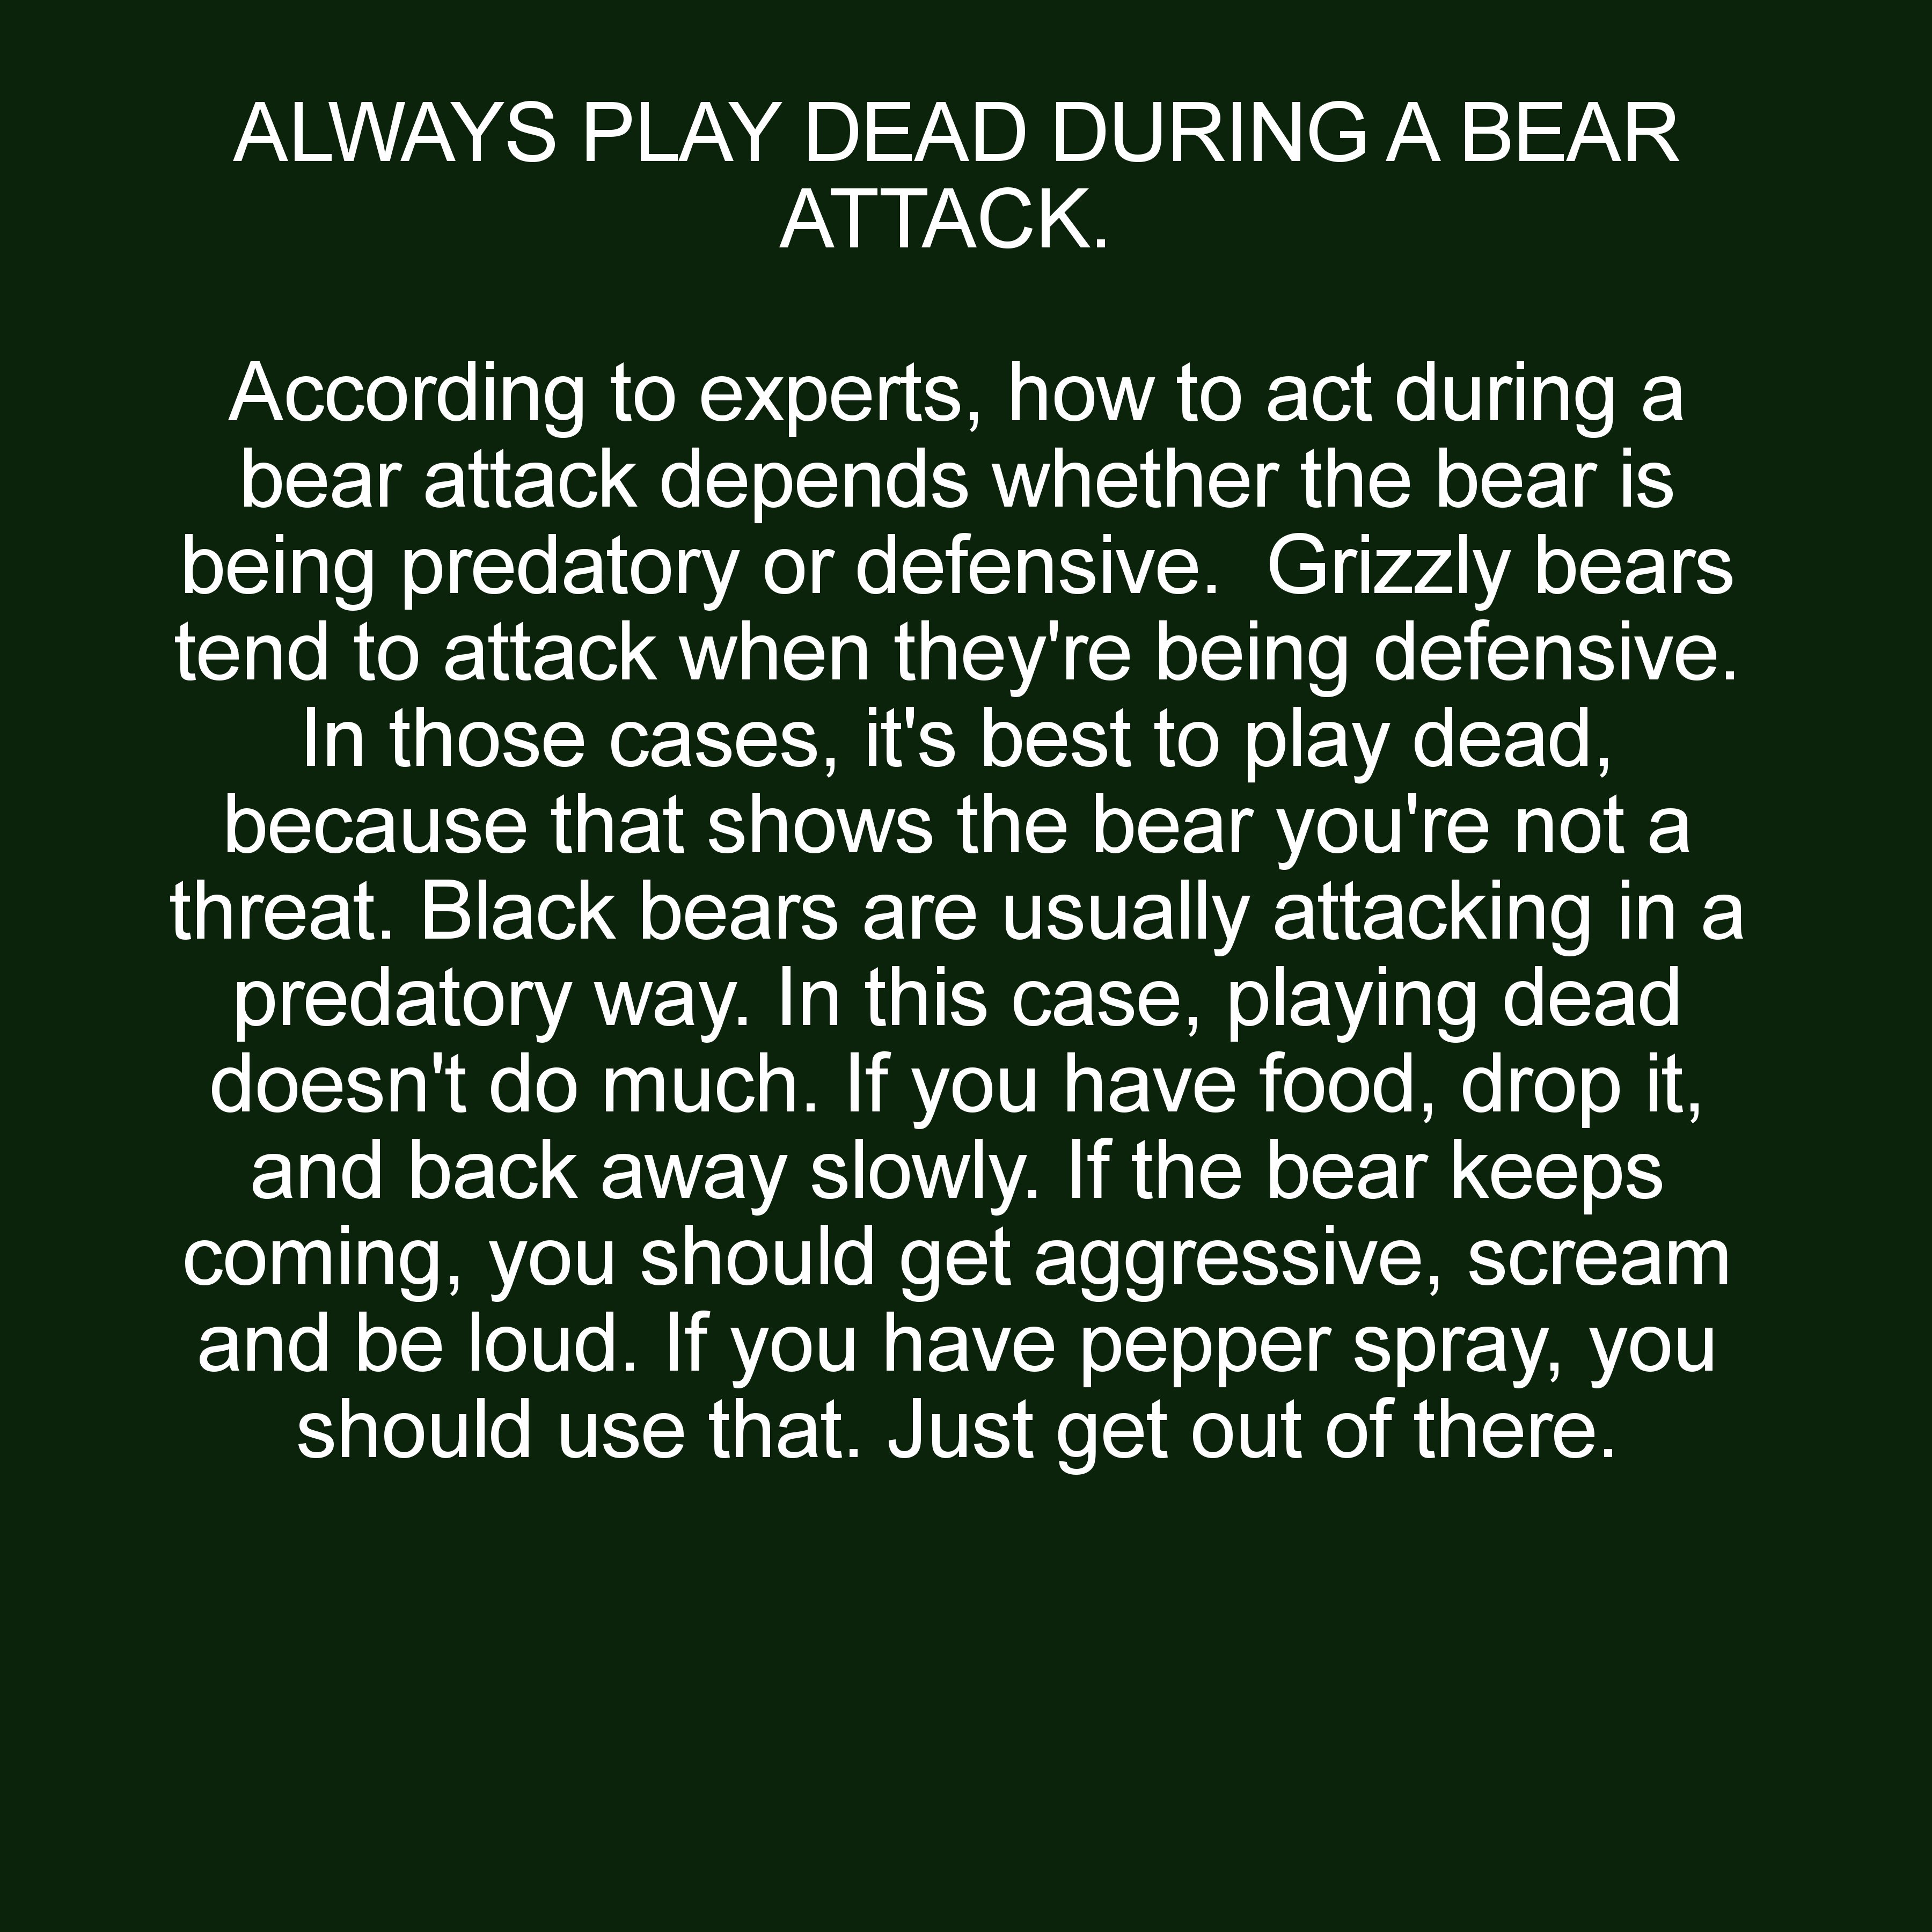 grass - Always Play Dead During A Bear Attack. According to experts, how to act during a bear attack depends whether the bear is being predatory or defensive. Grizzly bears tend to attack when they're being defensive. In those cases, it's best to play dea